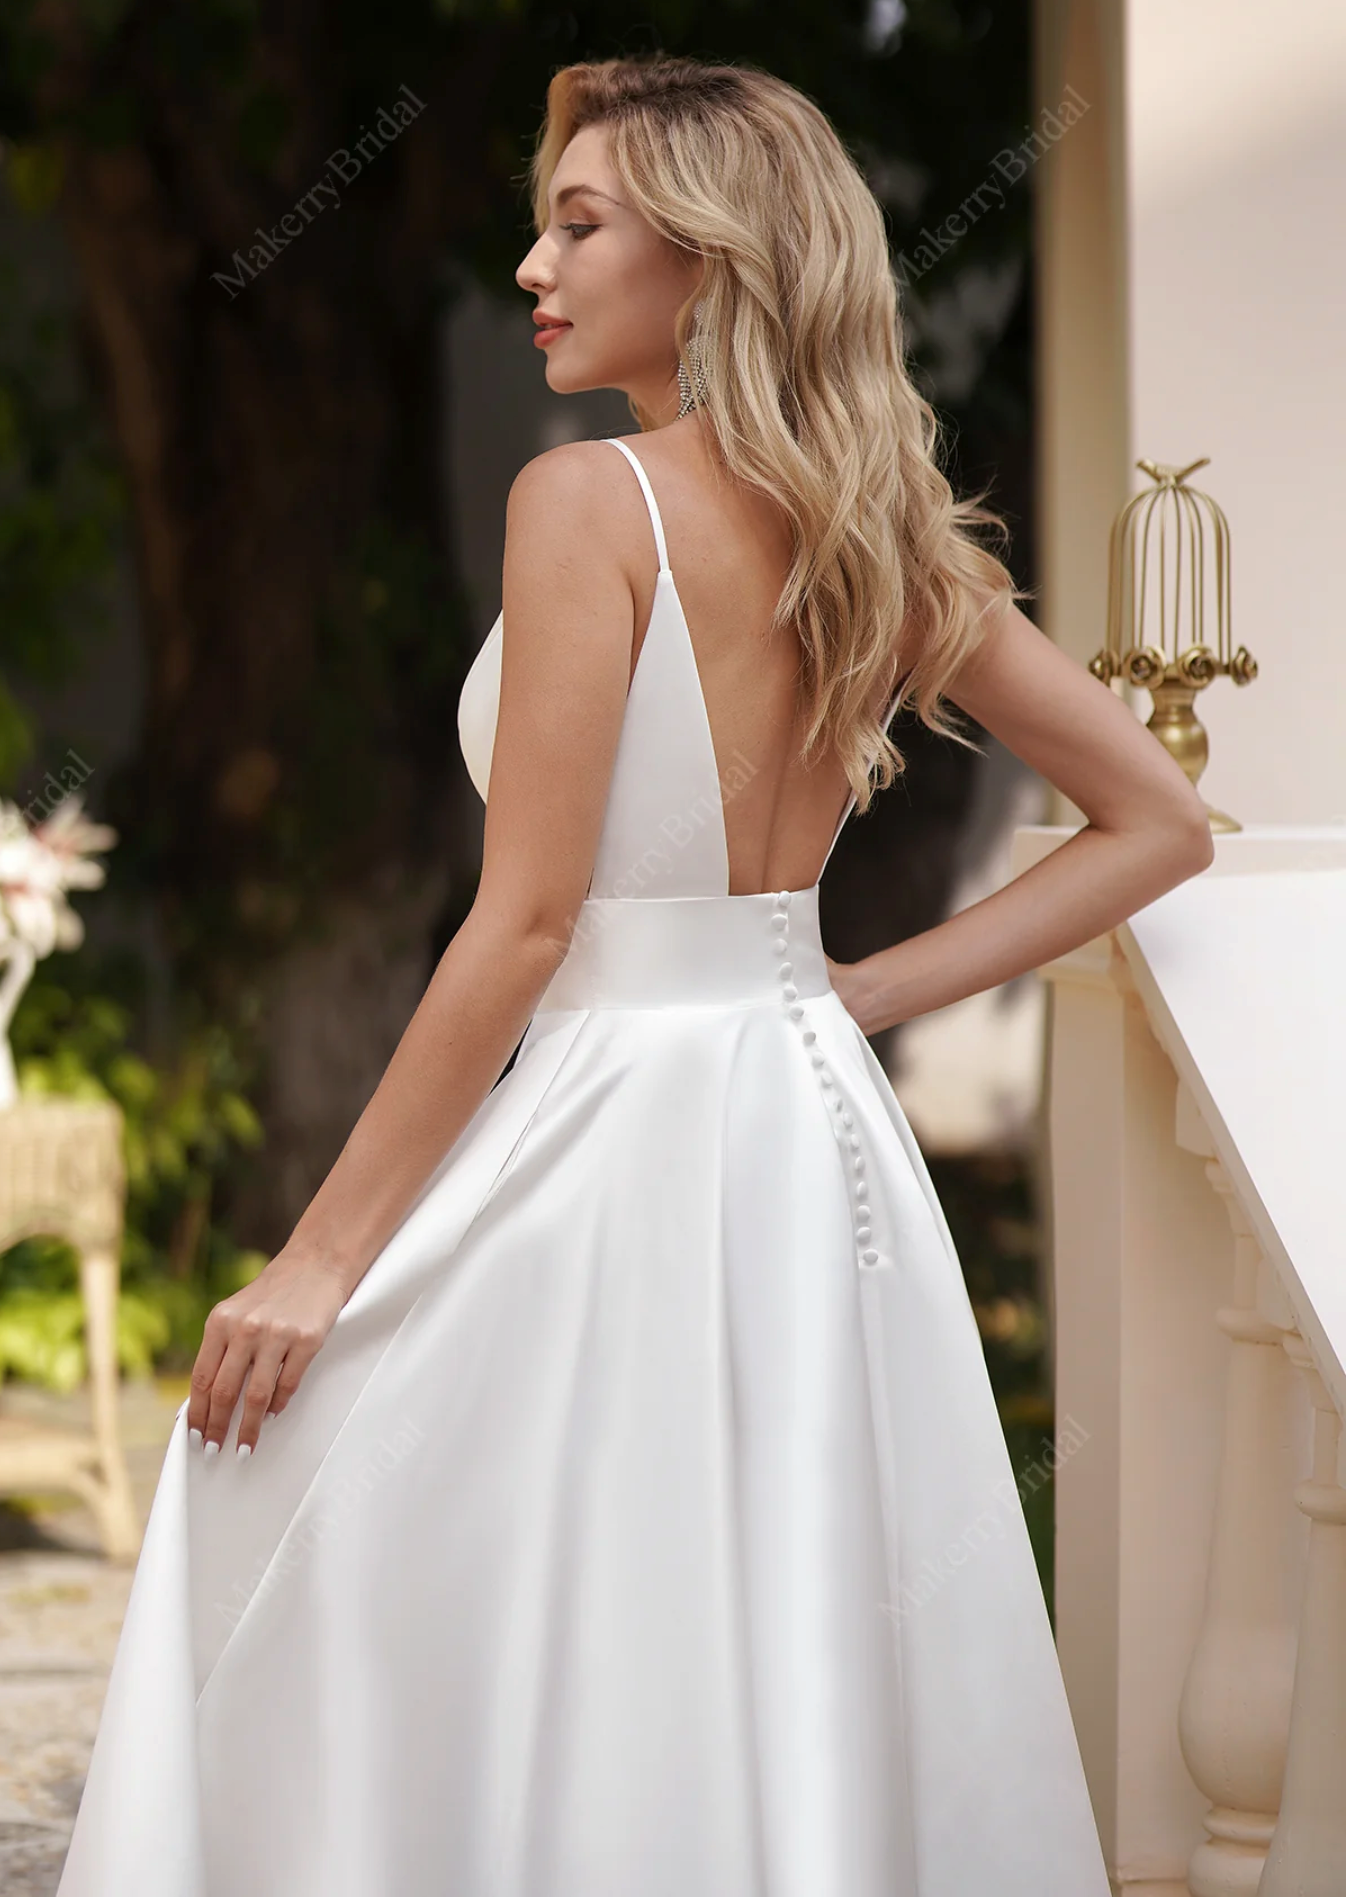 Simple Short Satin Wedding Dress With Pockets – TulleLux Bridal Crowns ...